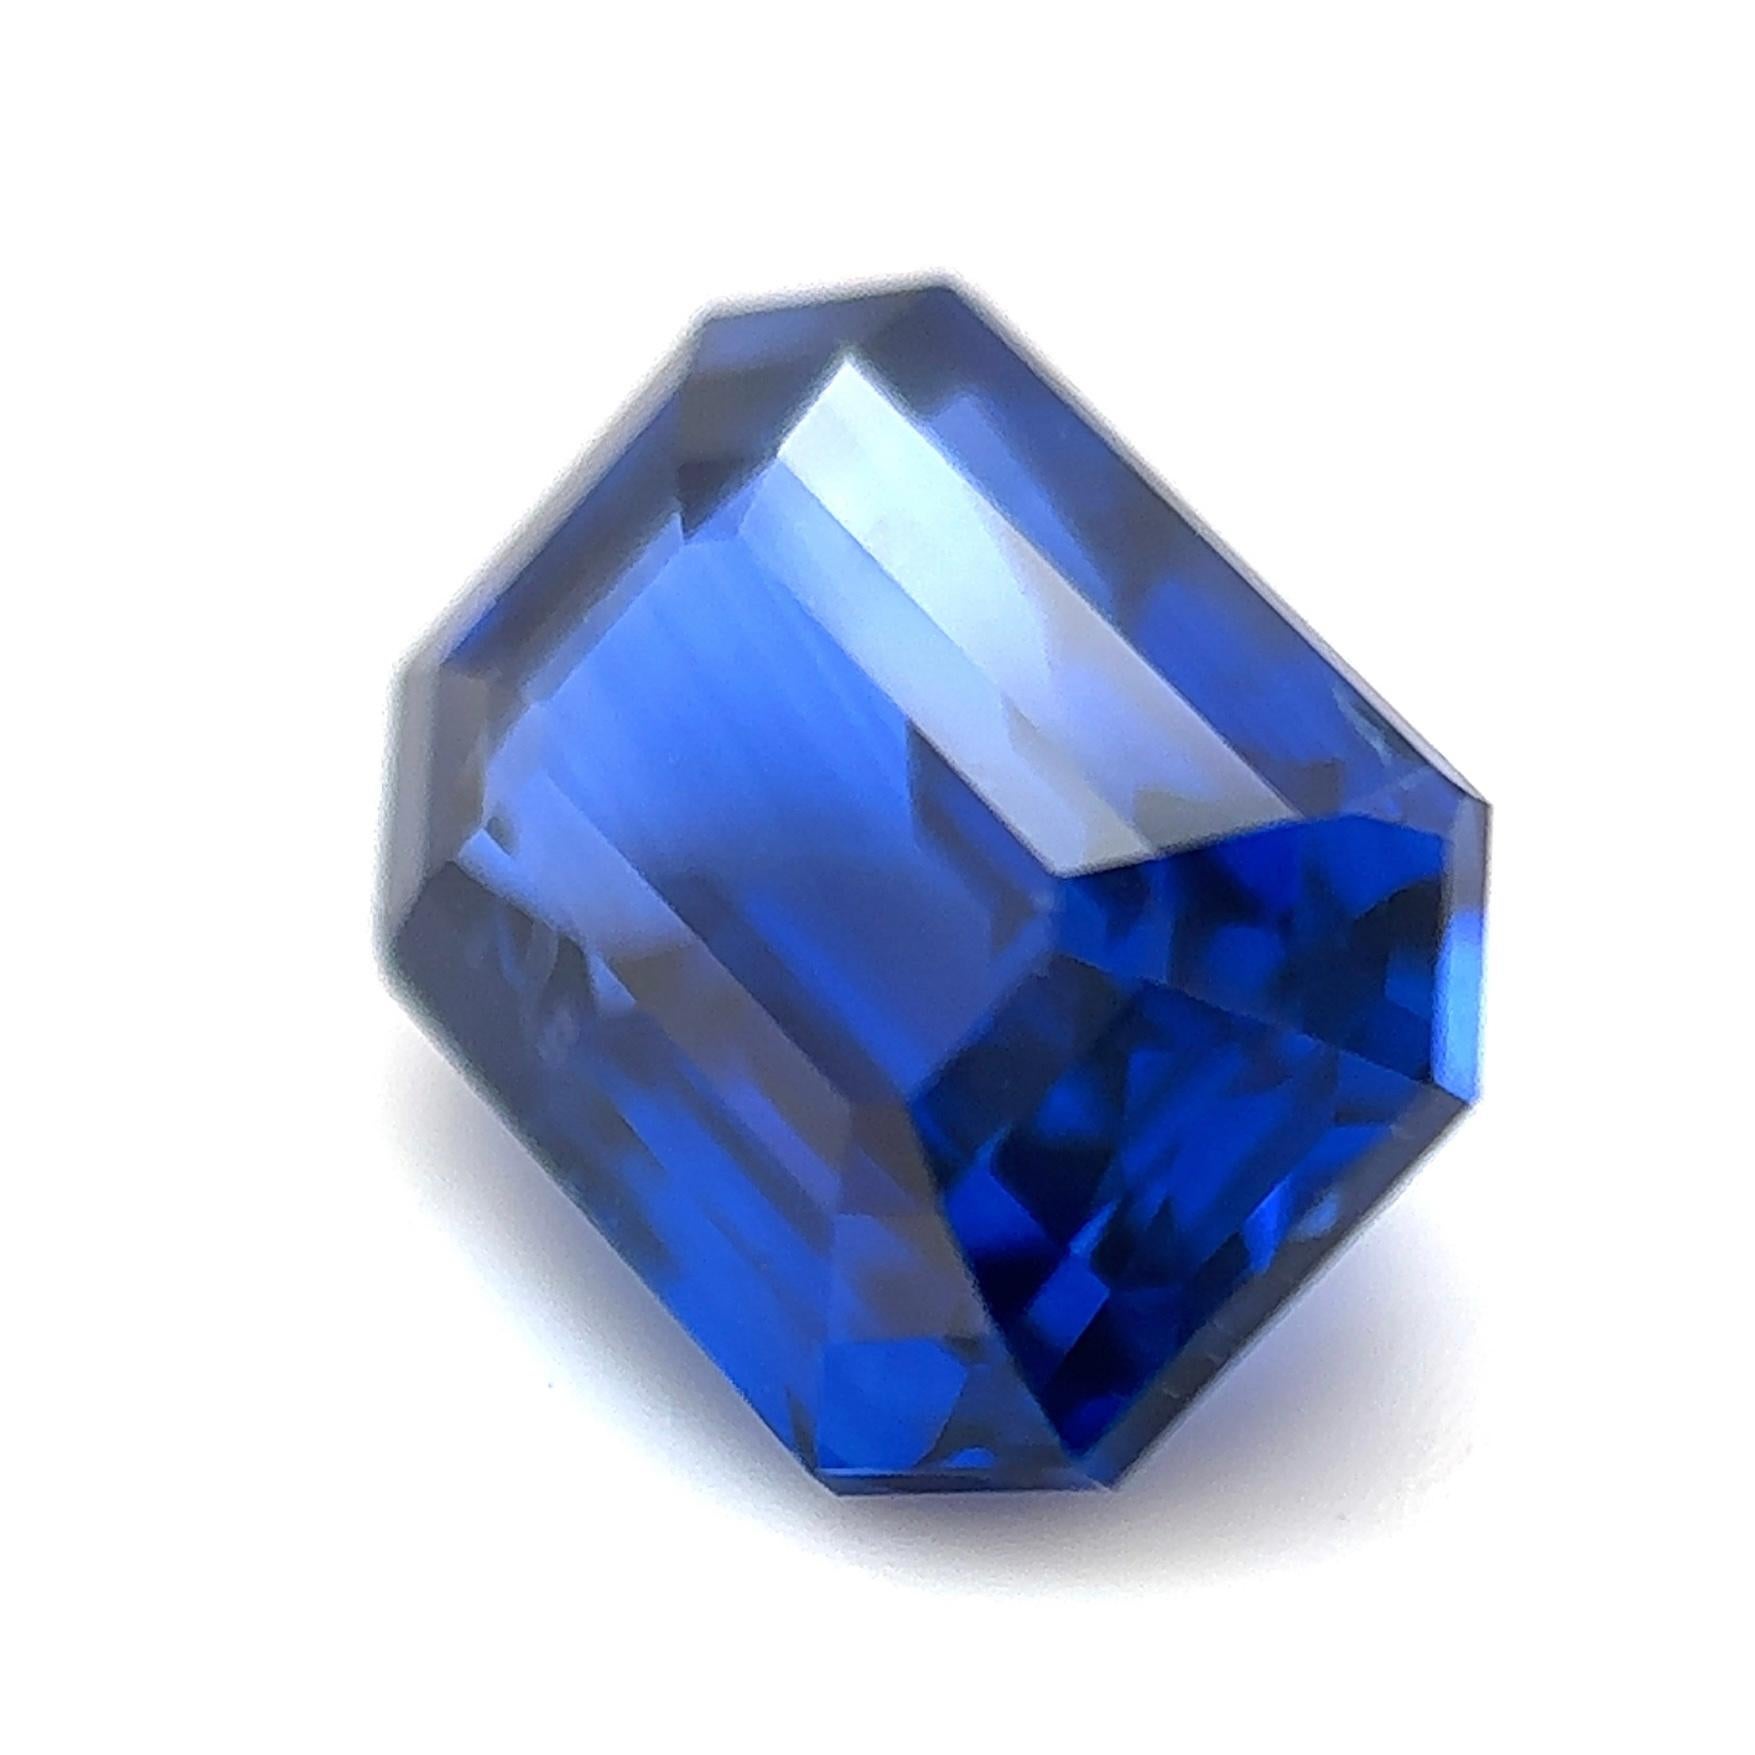 3.09 Carat heated royal blue natural sapphire loose stone octagon (customization option available)

Indulge in the allure of unparalleled luxury with our exquisite 3.09-carat heated royal blue octagon sapphire loose stone. Radiating with a